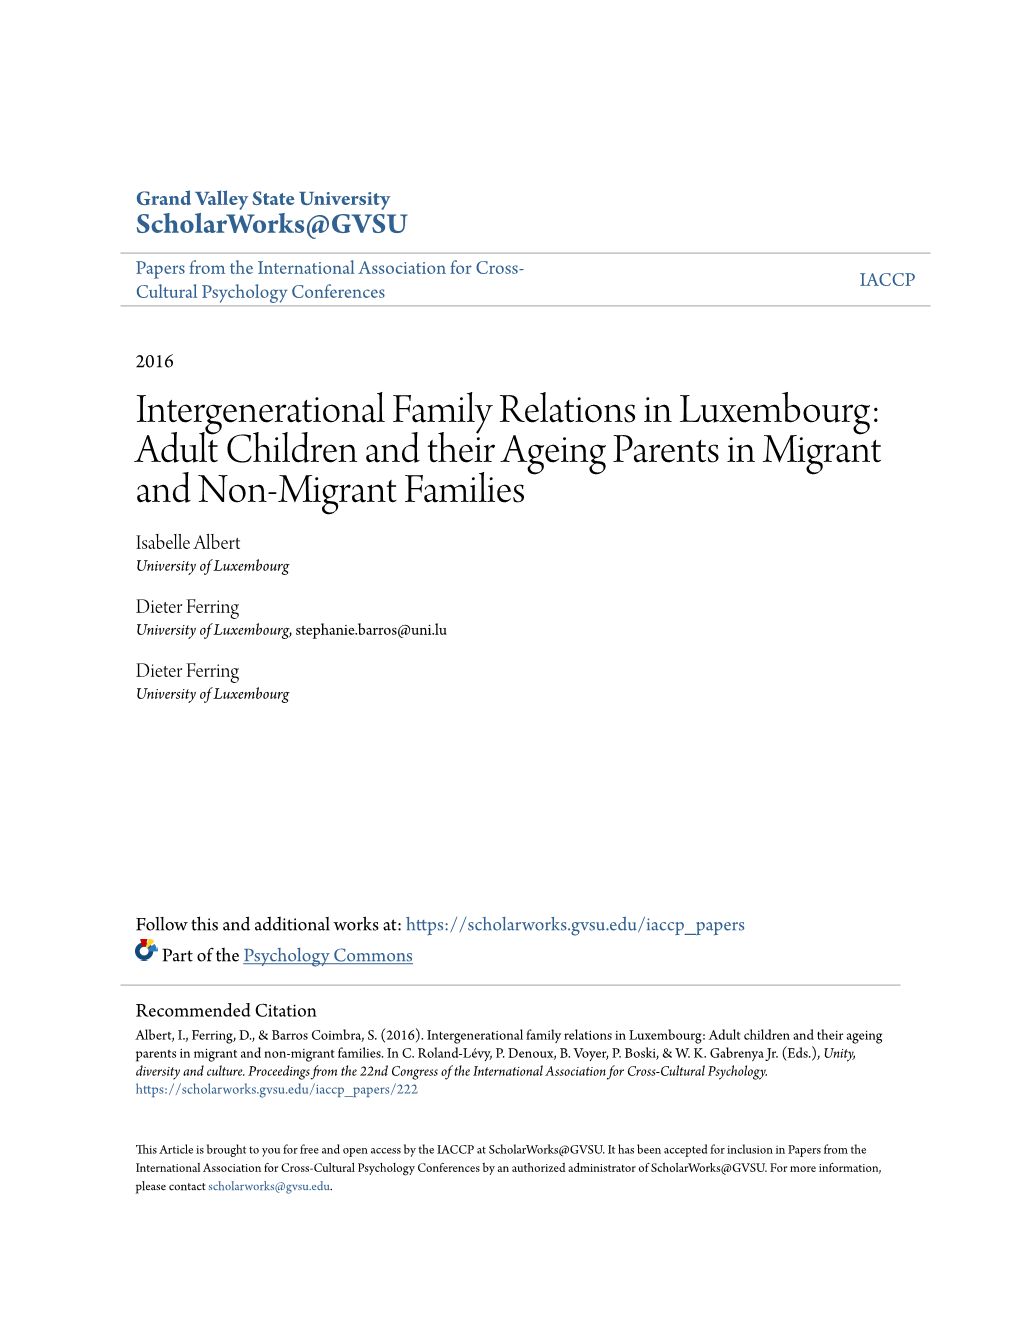 Intergenerational Family Relations in Luxembourg: Adult Children and Their Ageing Parents in Migrant and Non-Migrant Families Isabelle Albert University of Luxembourg